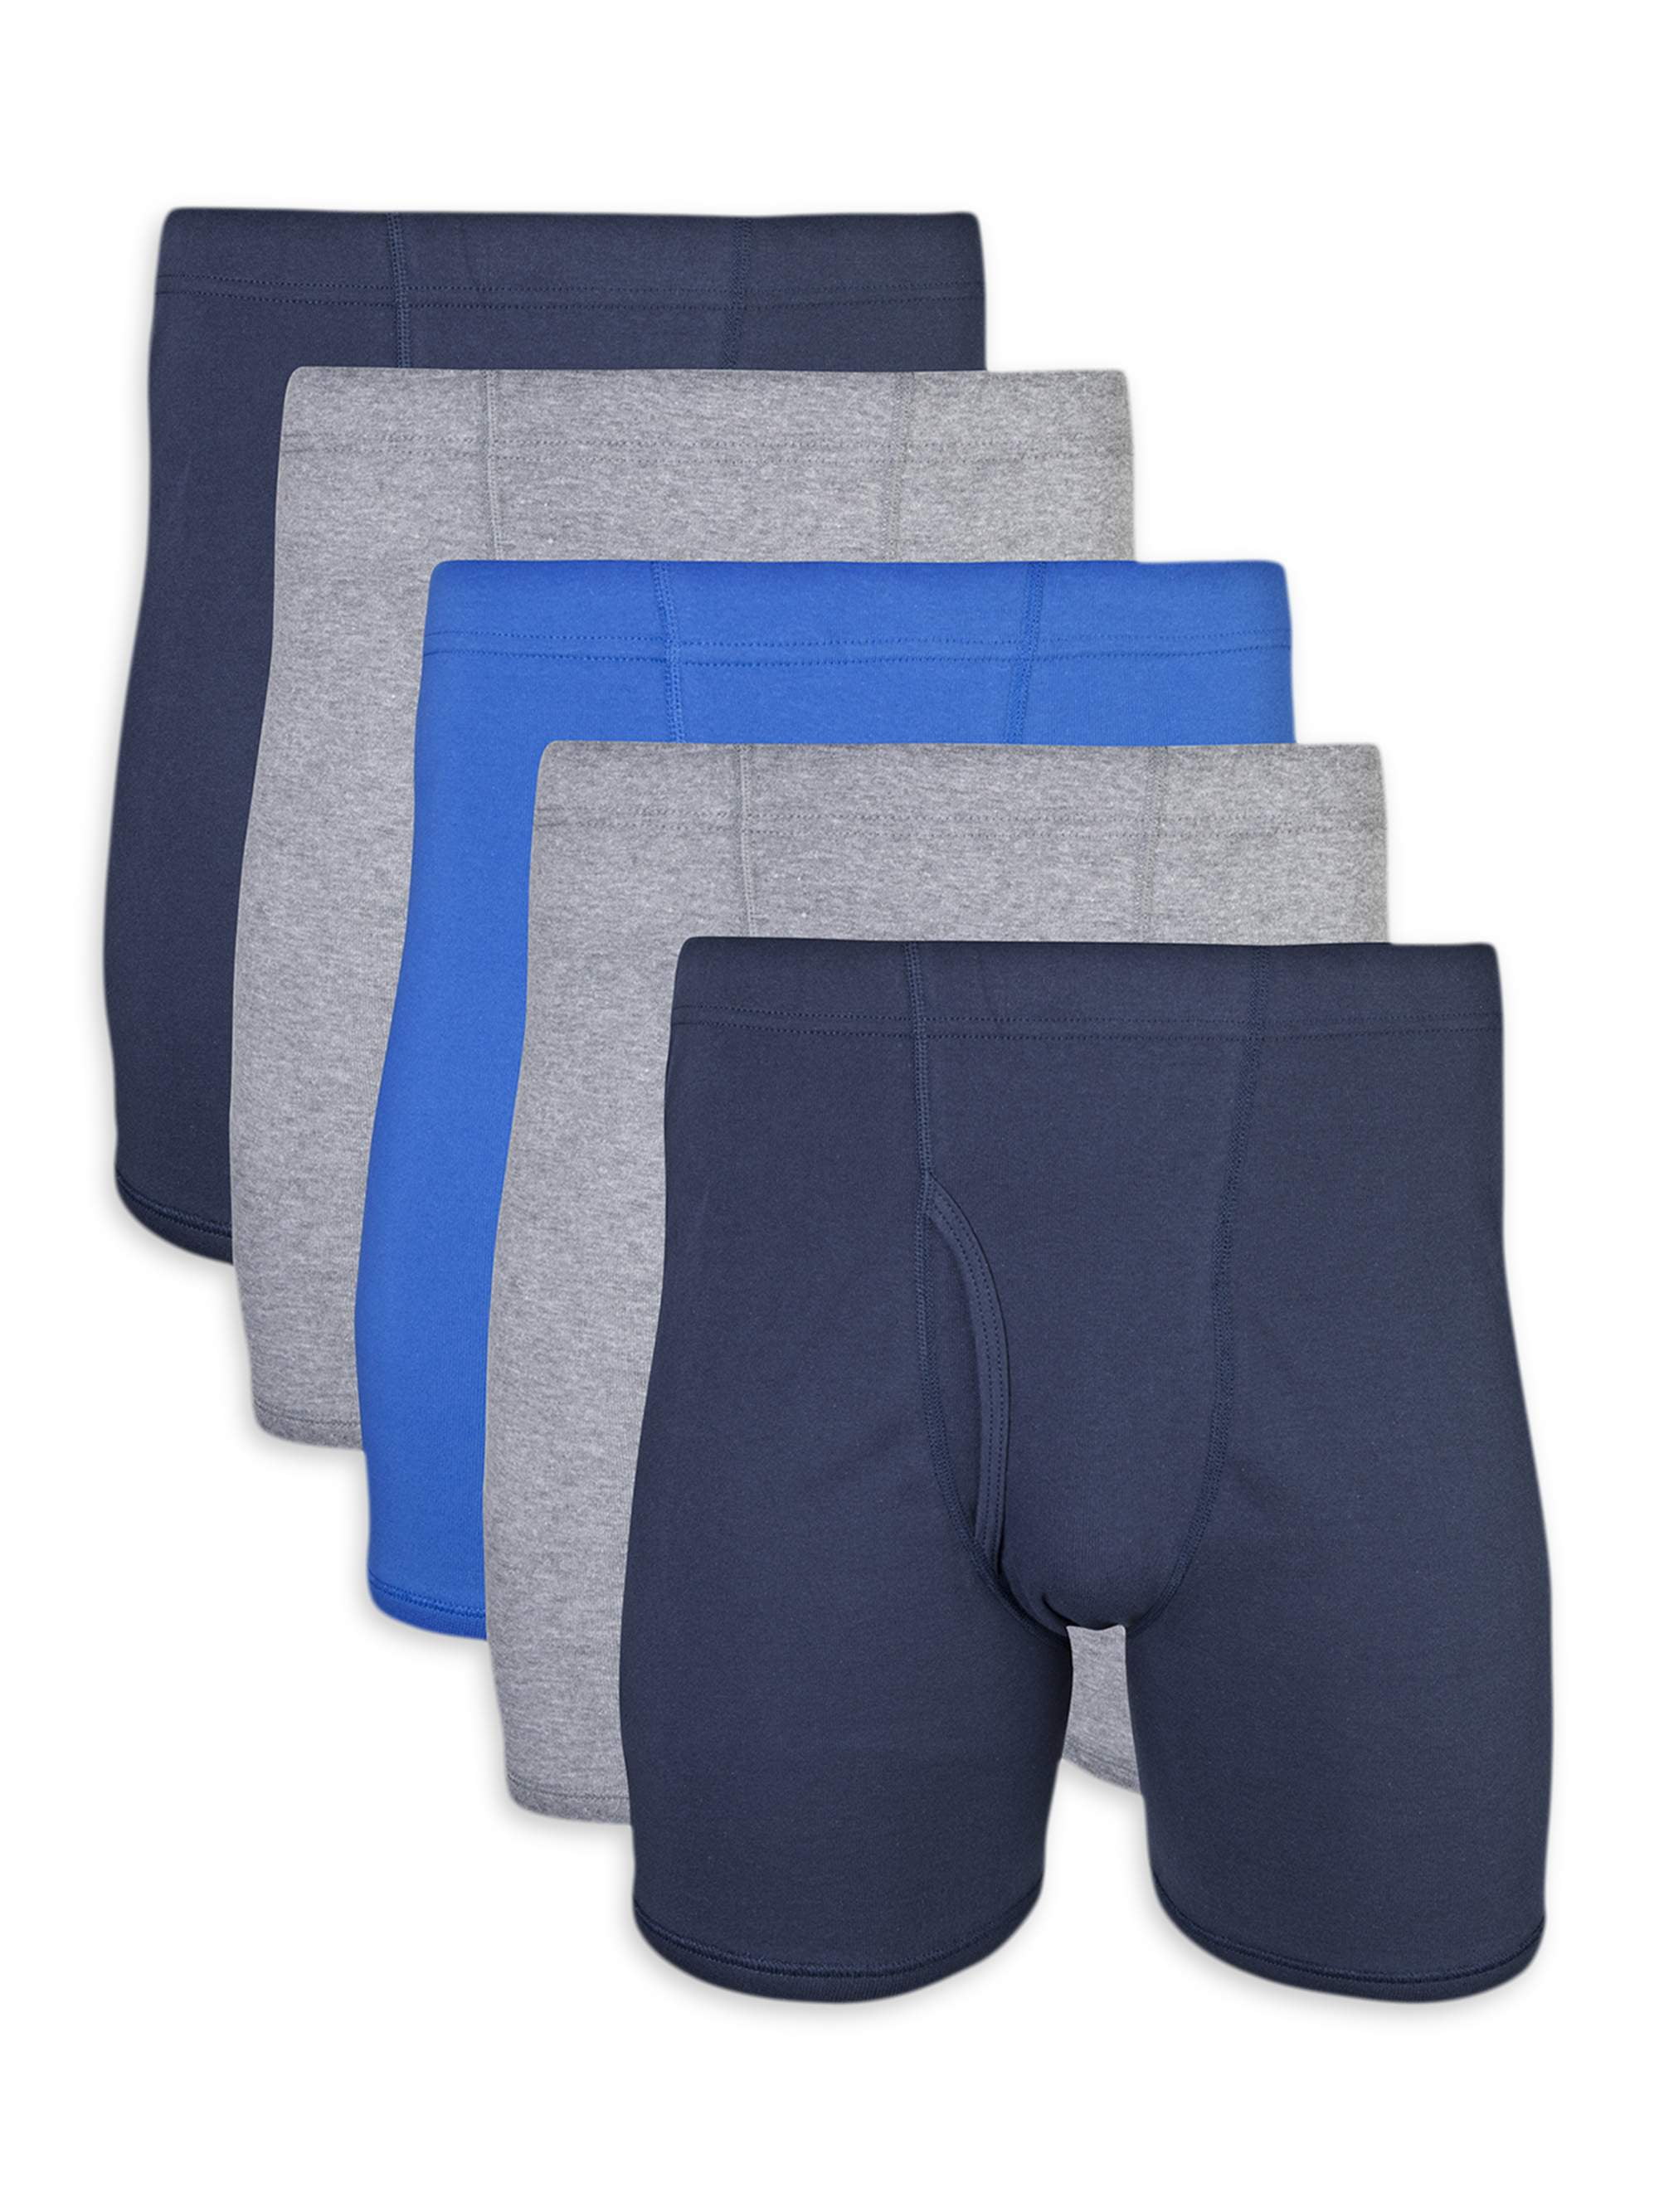 Gildan Adult Men's Boxer Briefs With Covered Waistband, 5-Pack